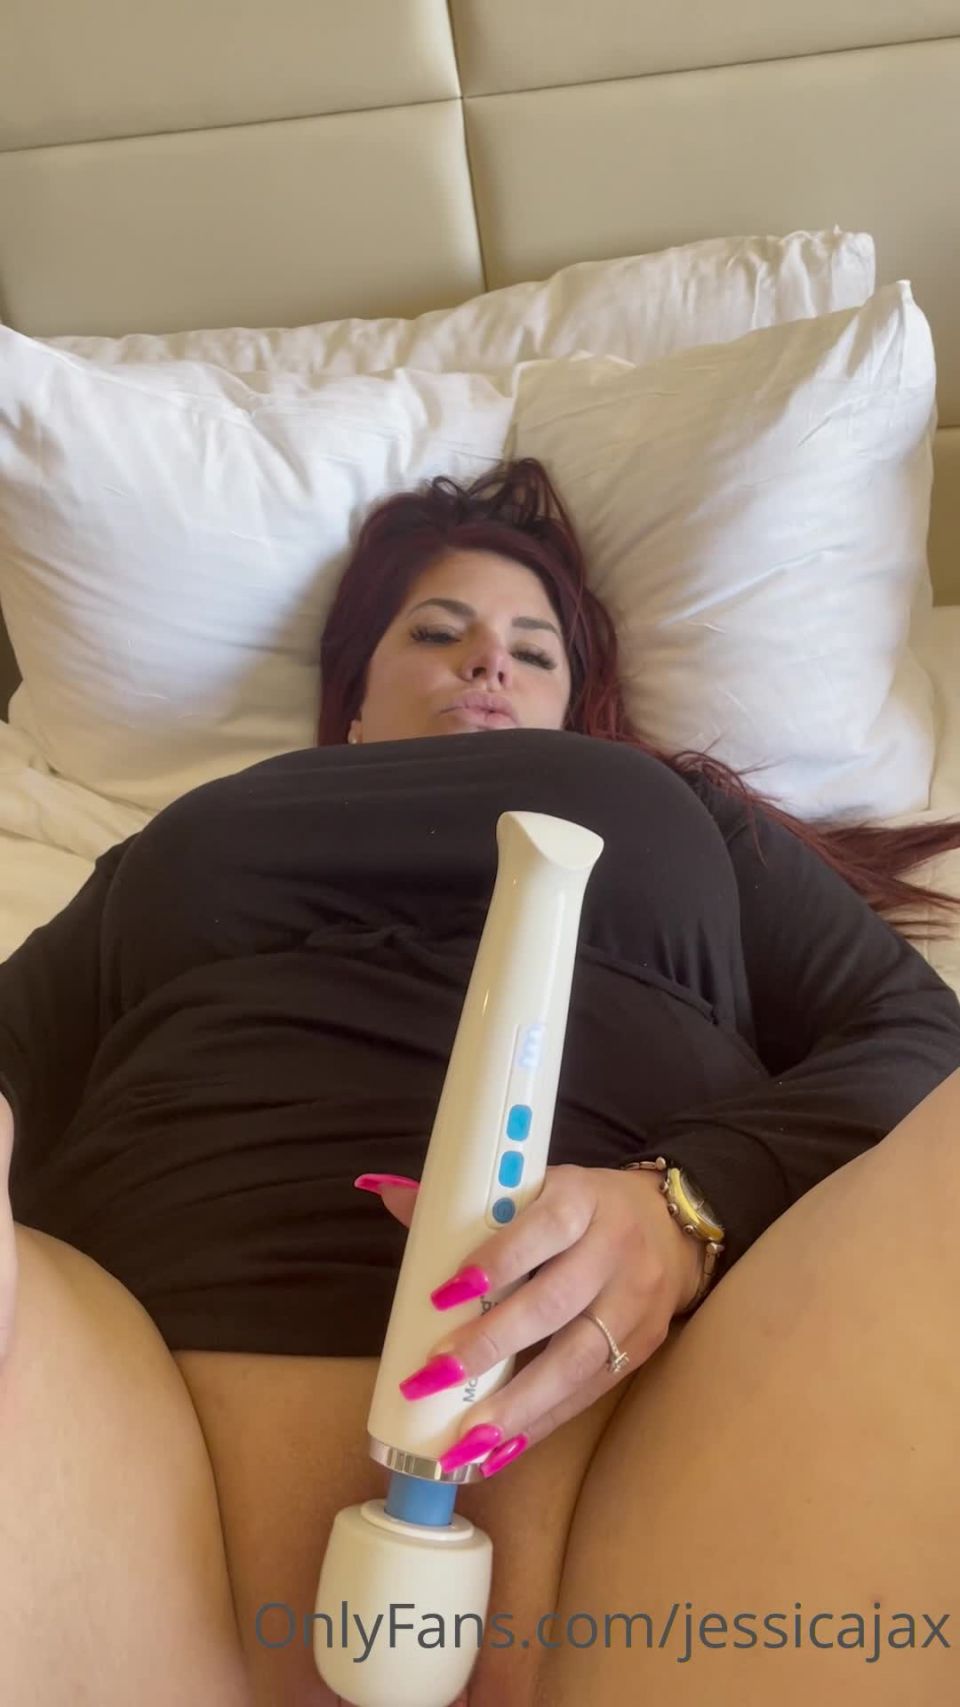 Onlyfans - Jessica Jax - jessicajaxTook some great loads today PSA Please remember all my fans that I fuck raw always have c - 02-04-2021